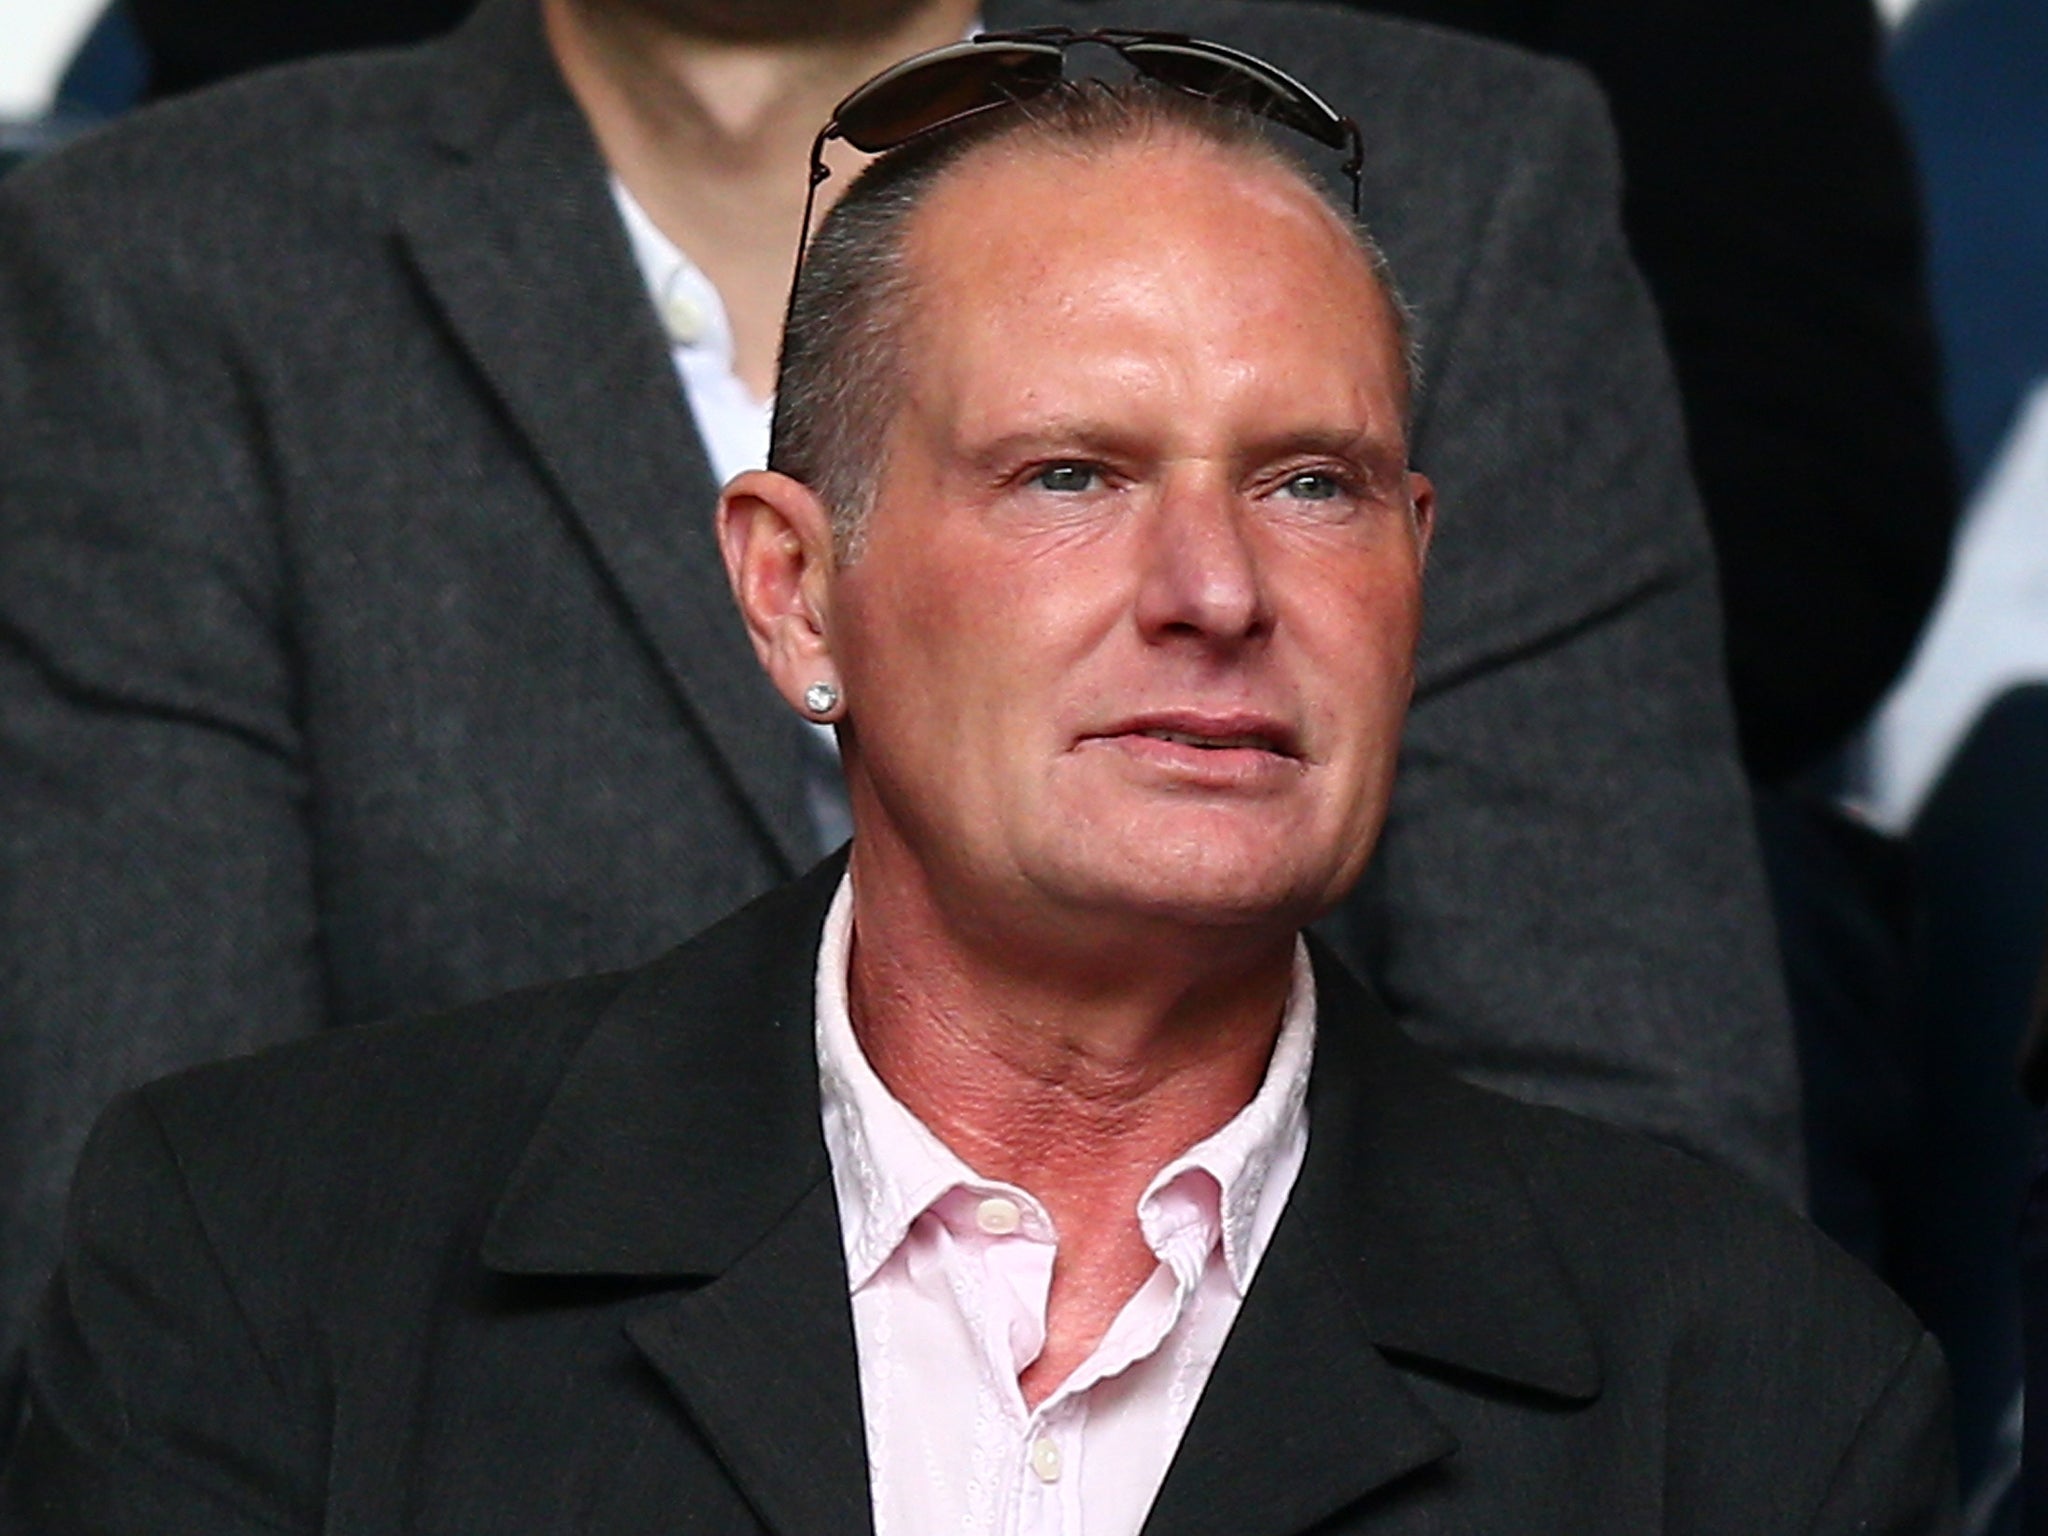 Gascoigne pictured at a football match